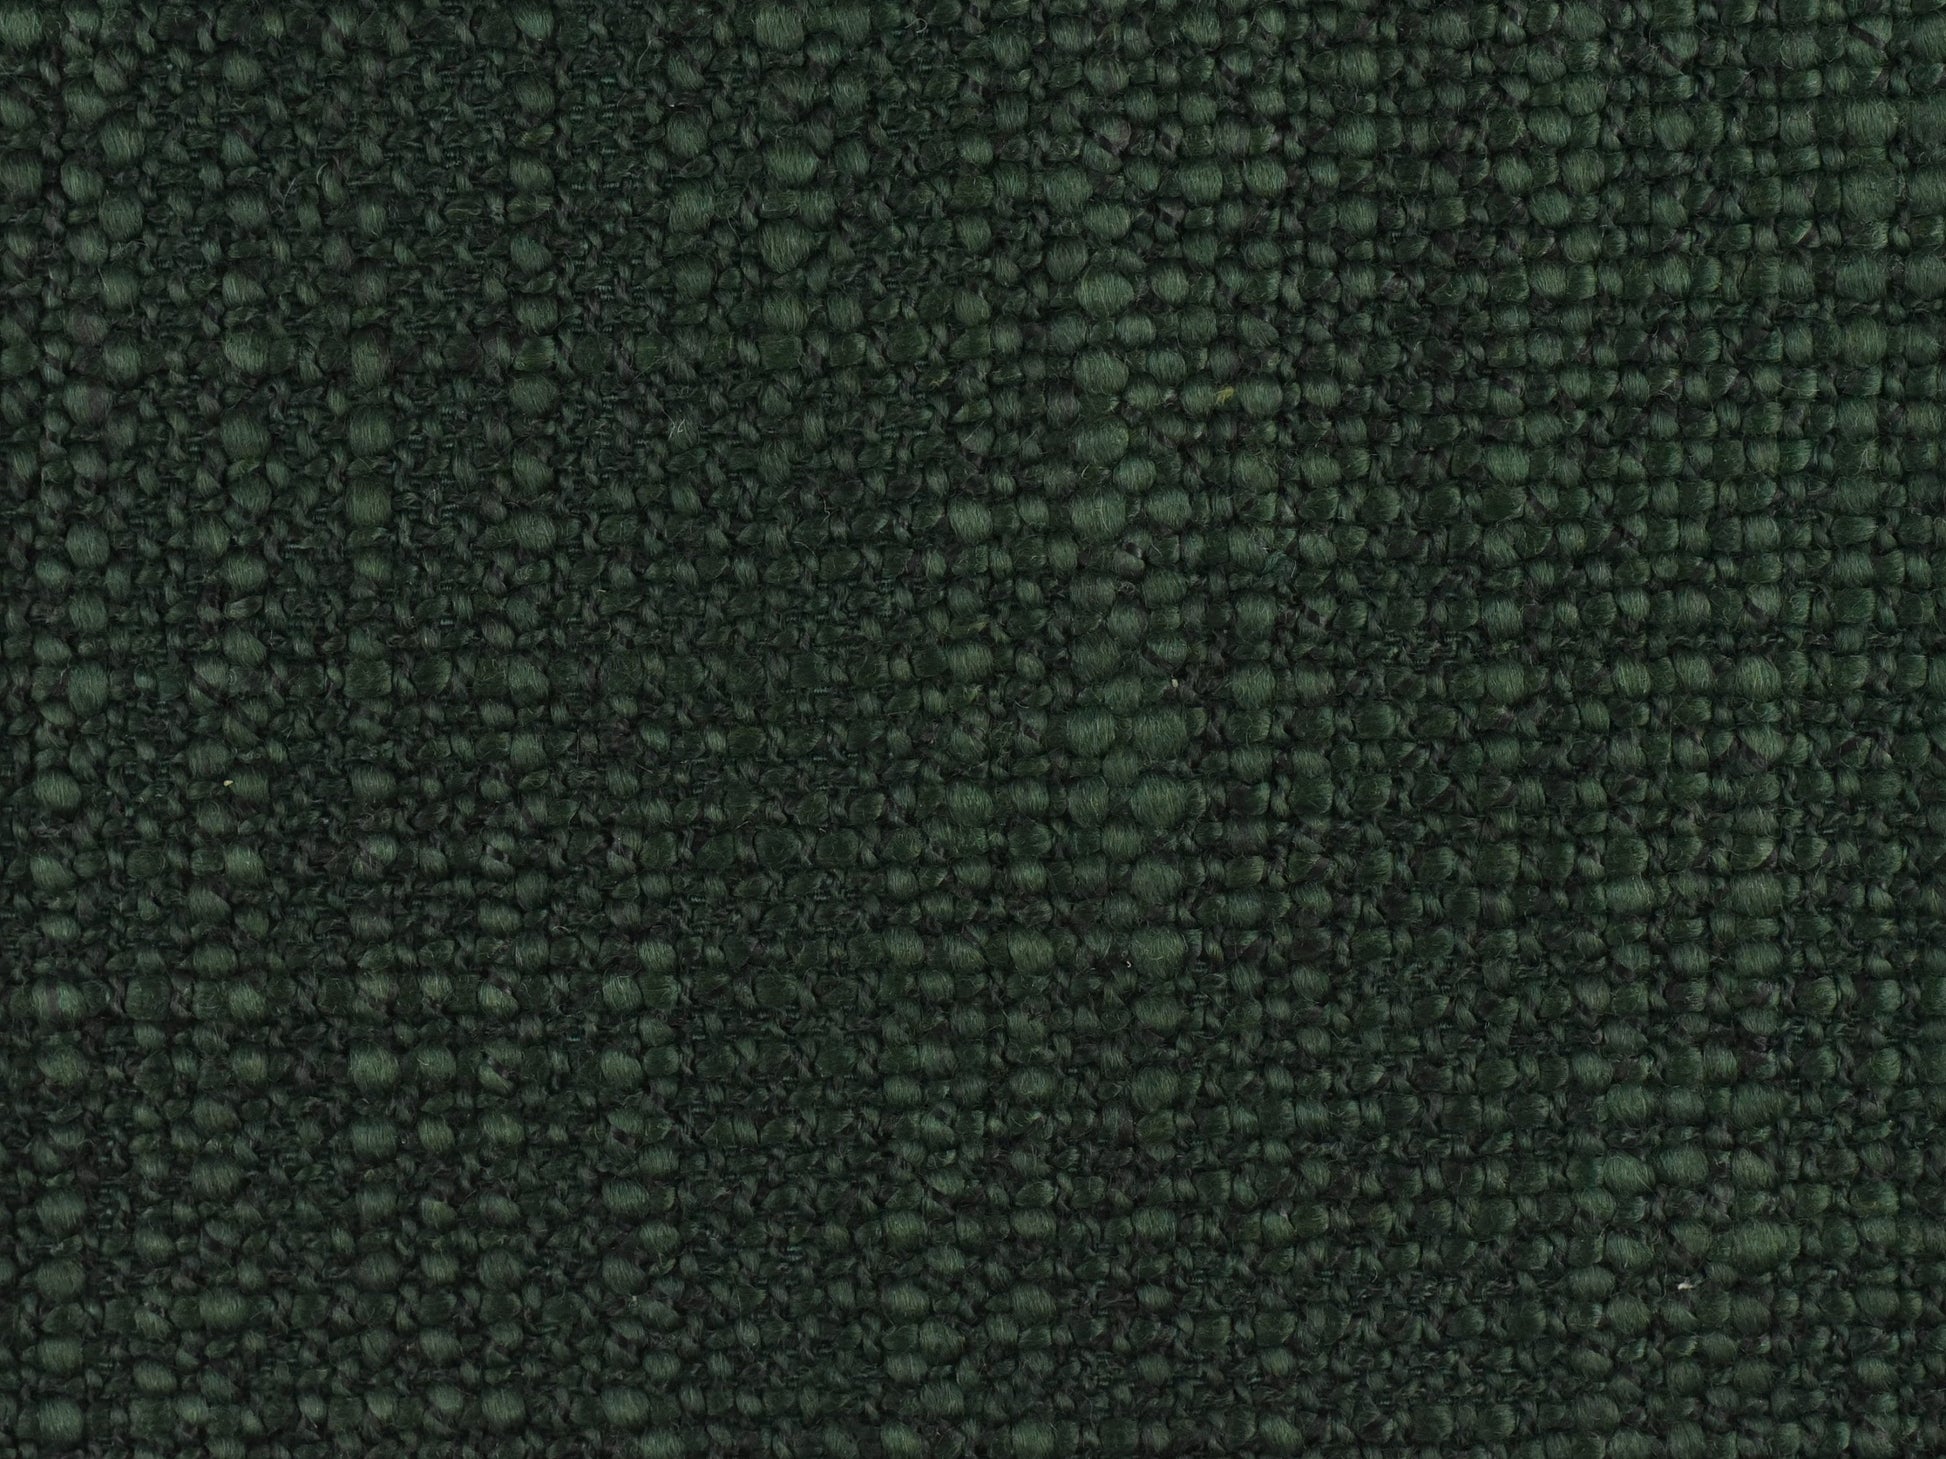 Cotton Blended Upholstery Fabric For Couch Pillow Chair|Heavy and Durable Furniture Fabric|Fabric By The Yard|55"W/850GSM Green